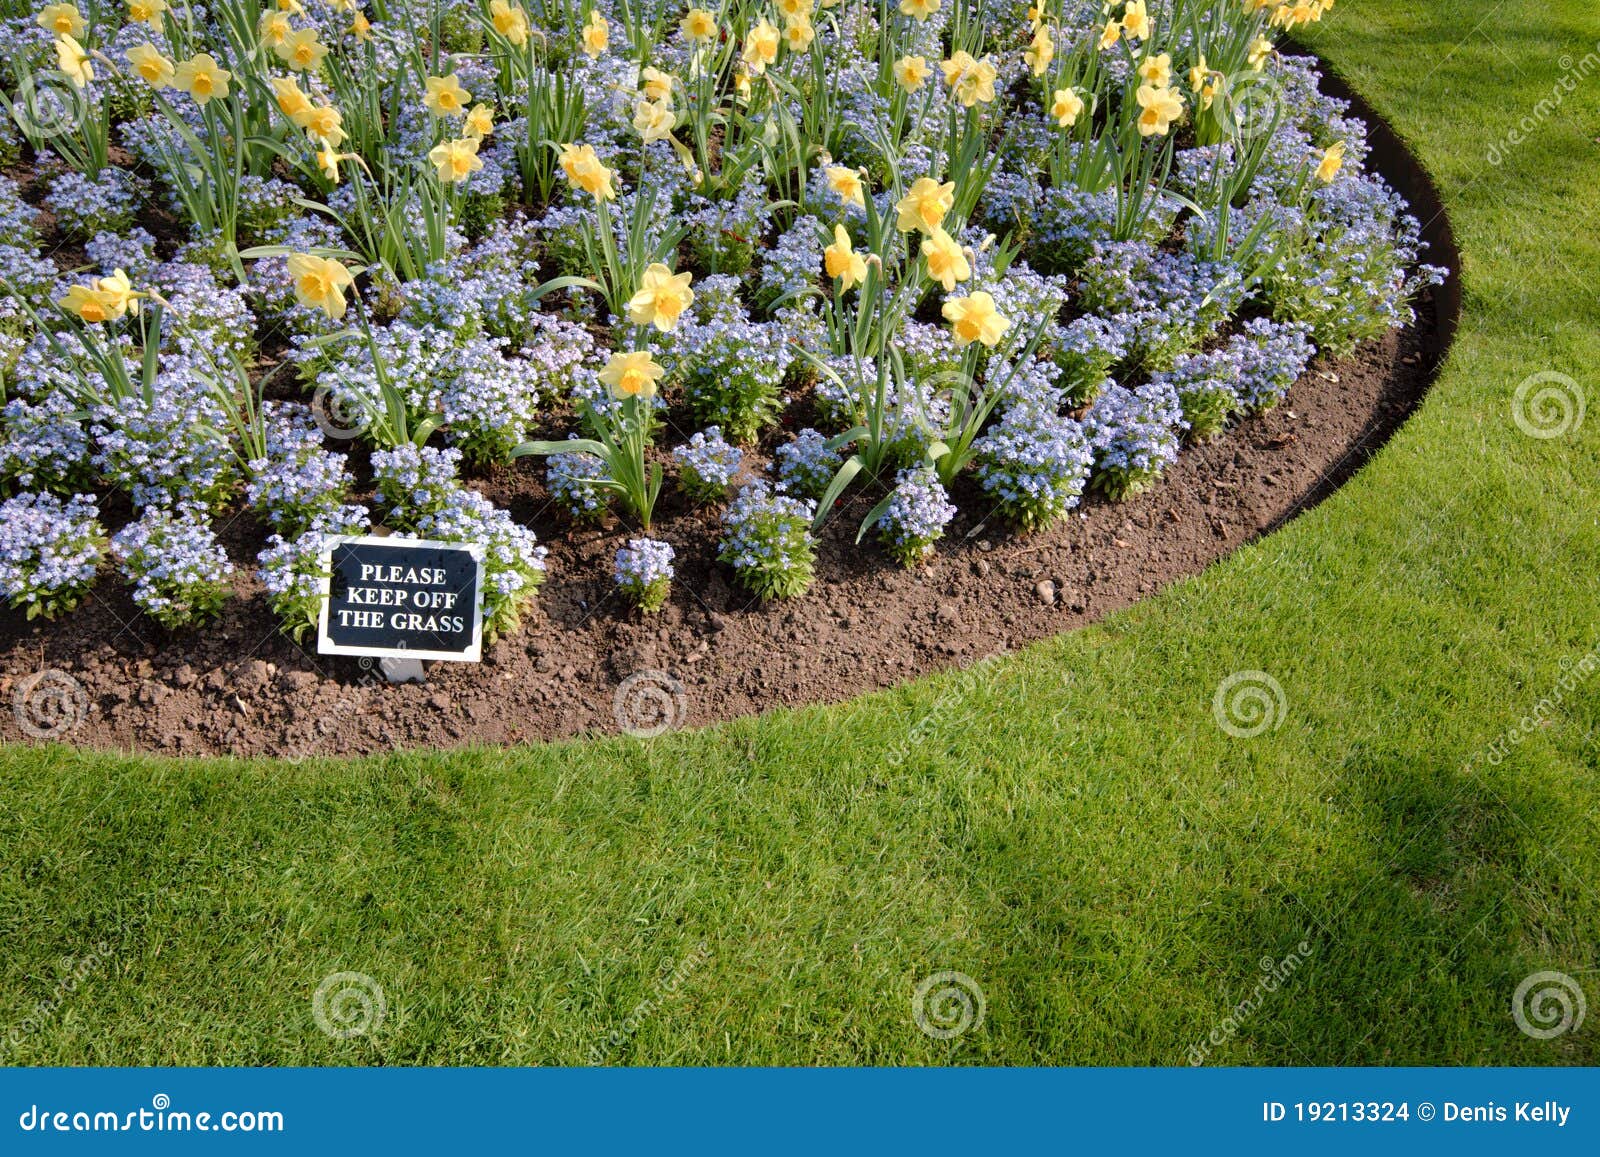 Keep Off The Grass Garden Sign Stock Photo Image Of Colourful